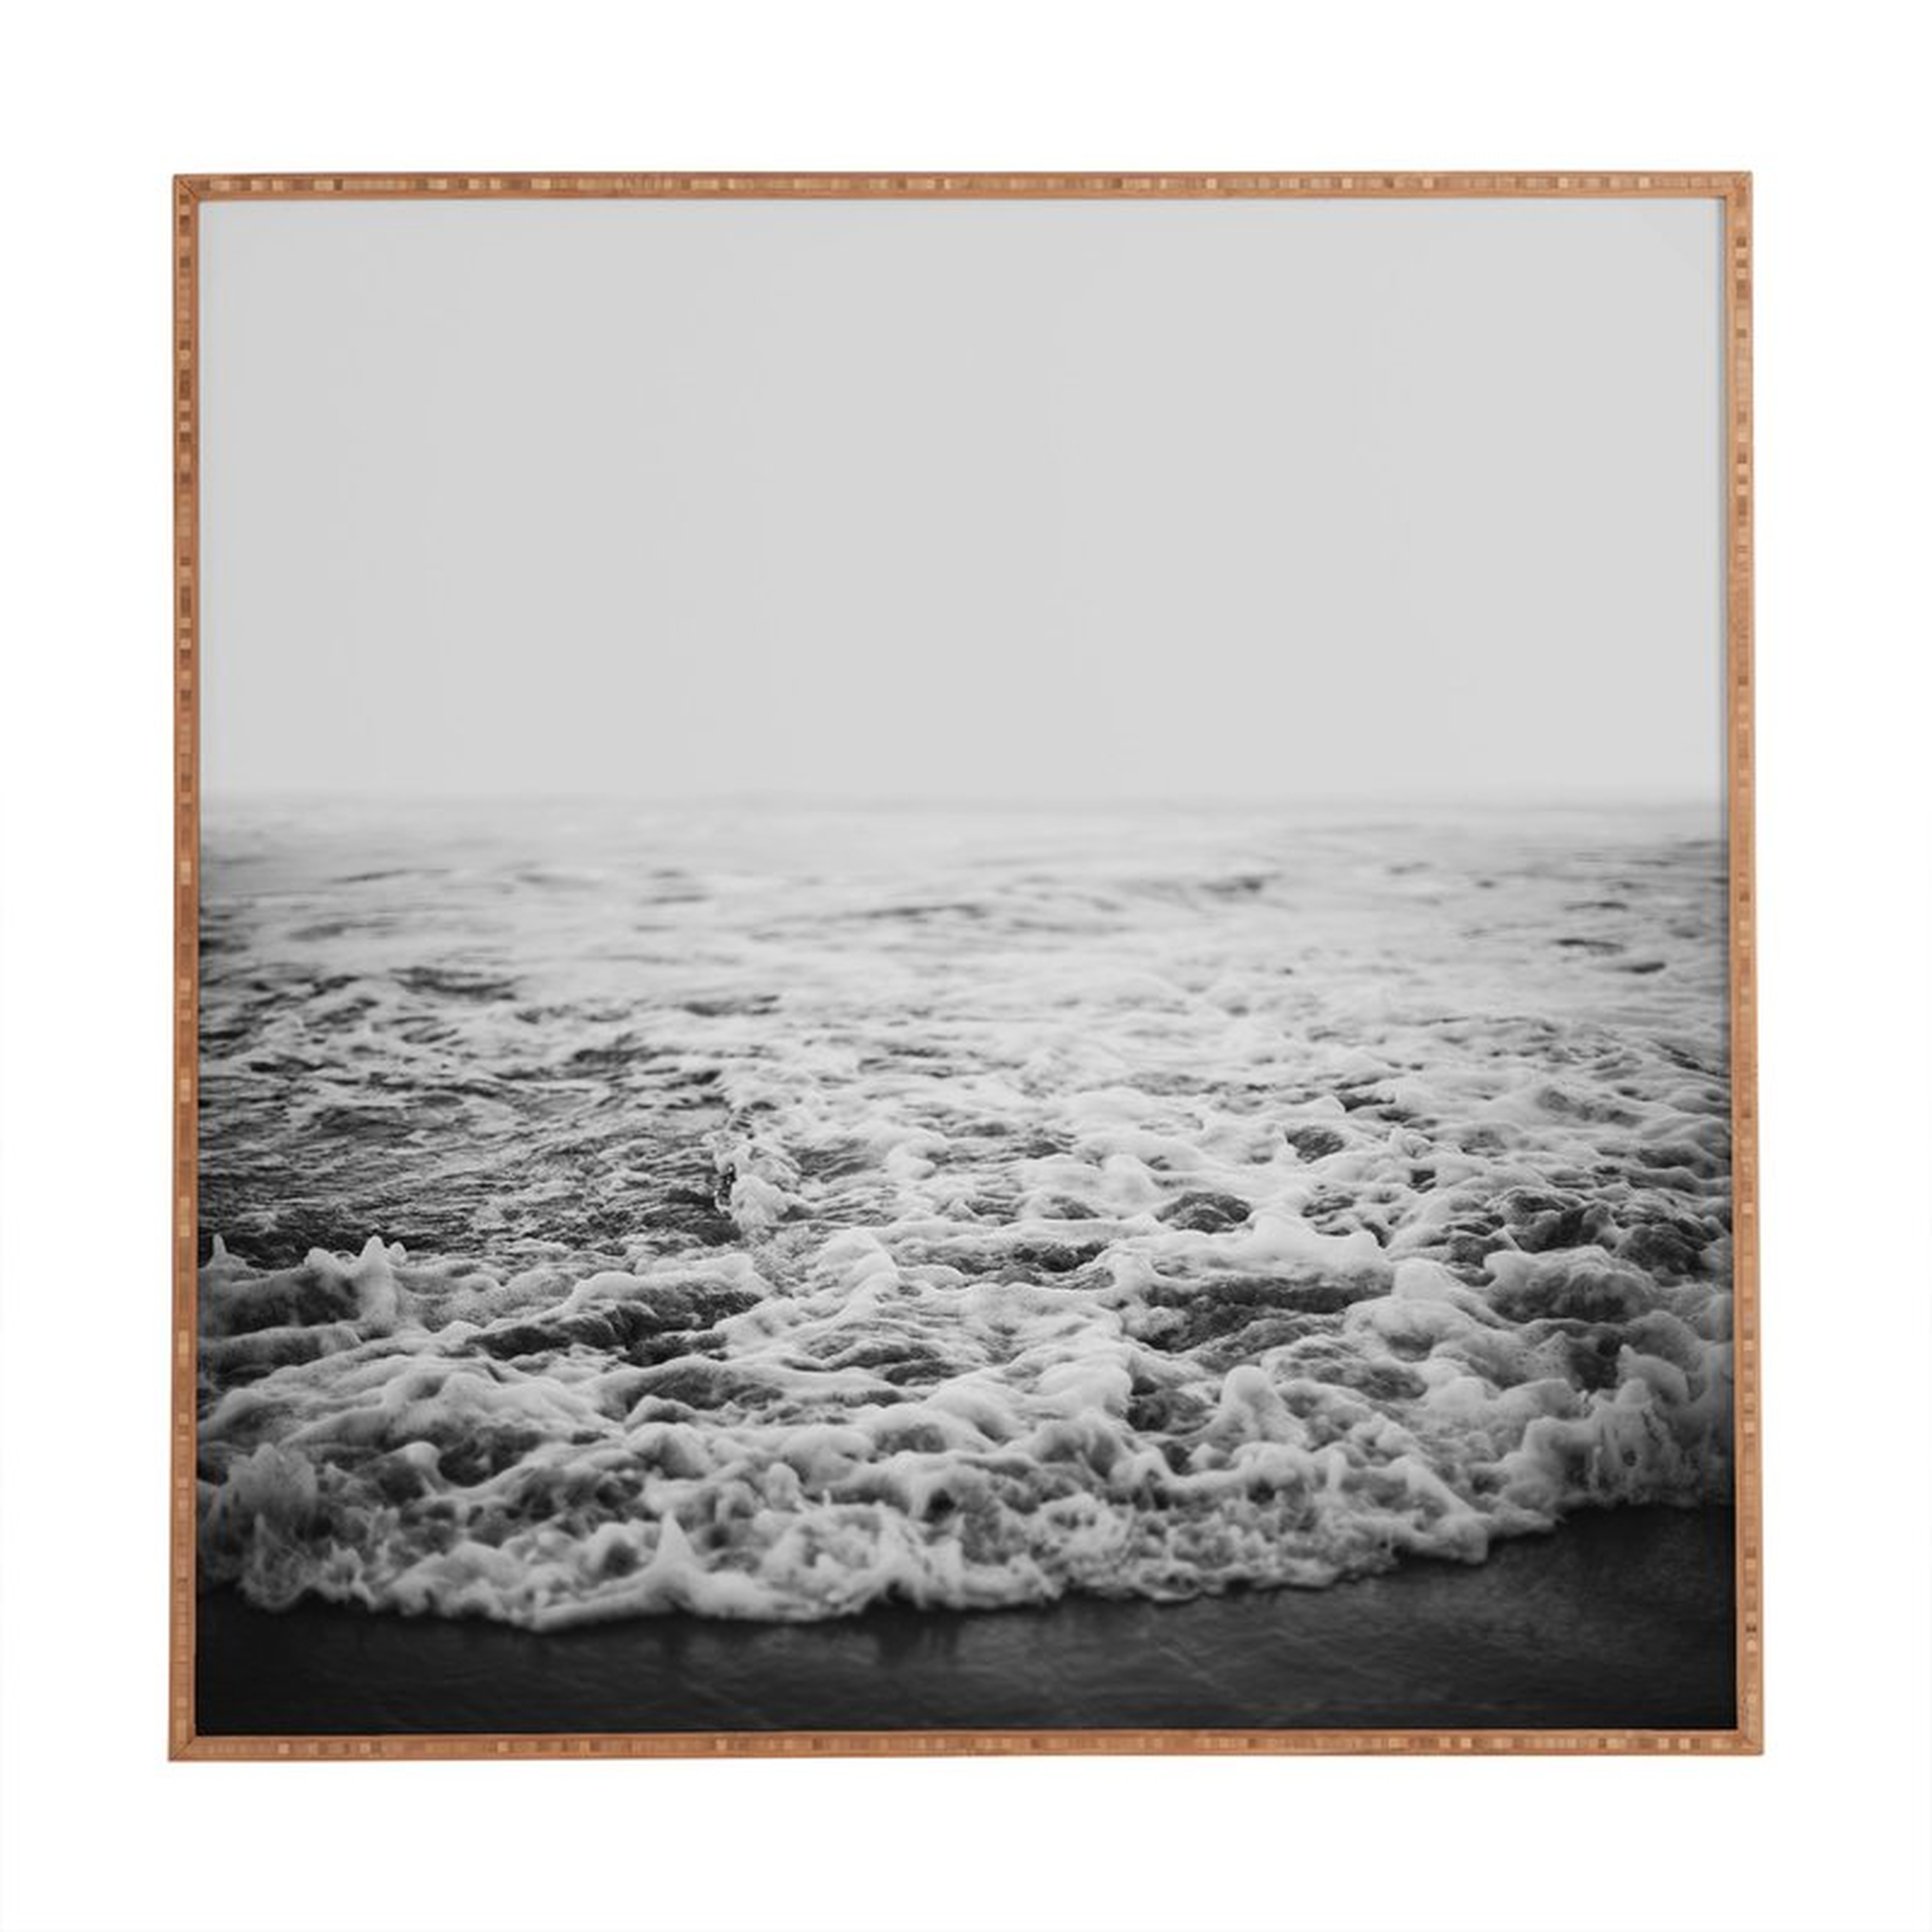 Infinity-Picture Frame Photograph on Wood, 30" x 30" - Wayfair